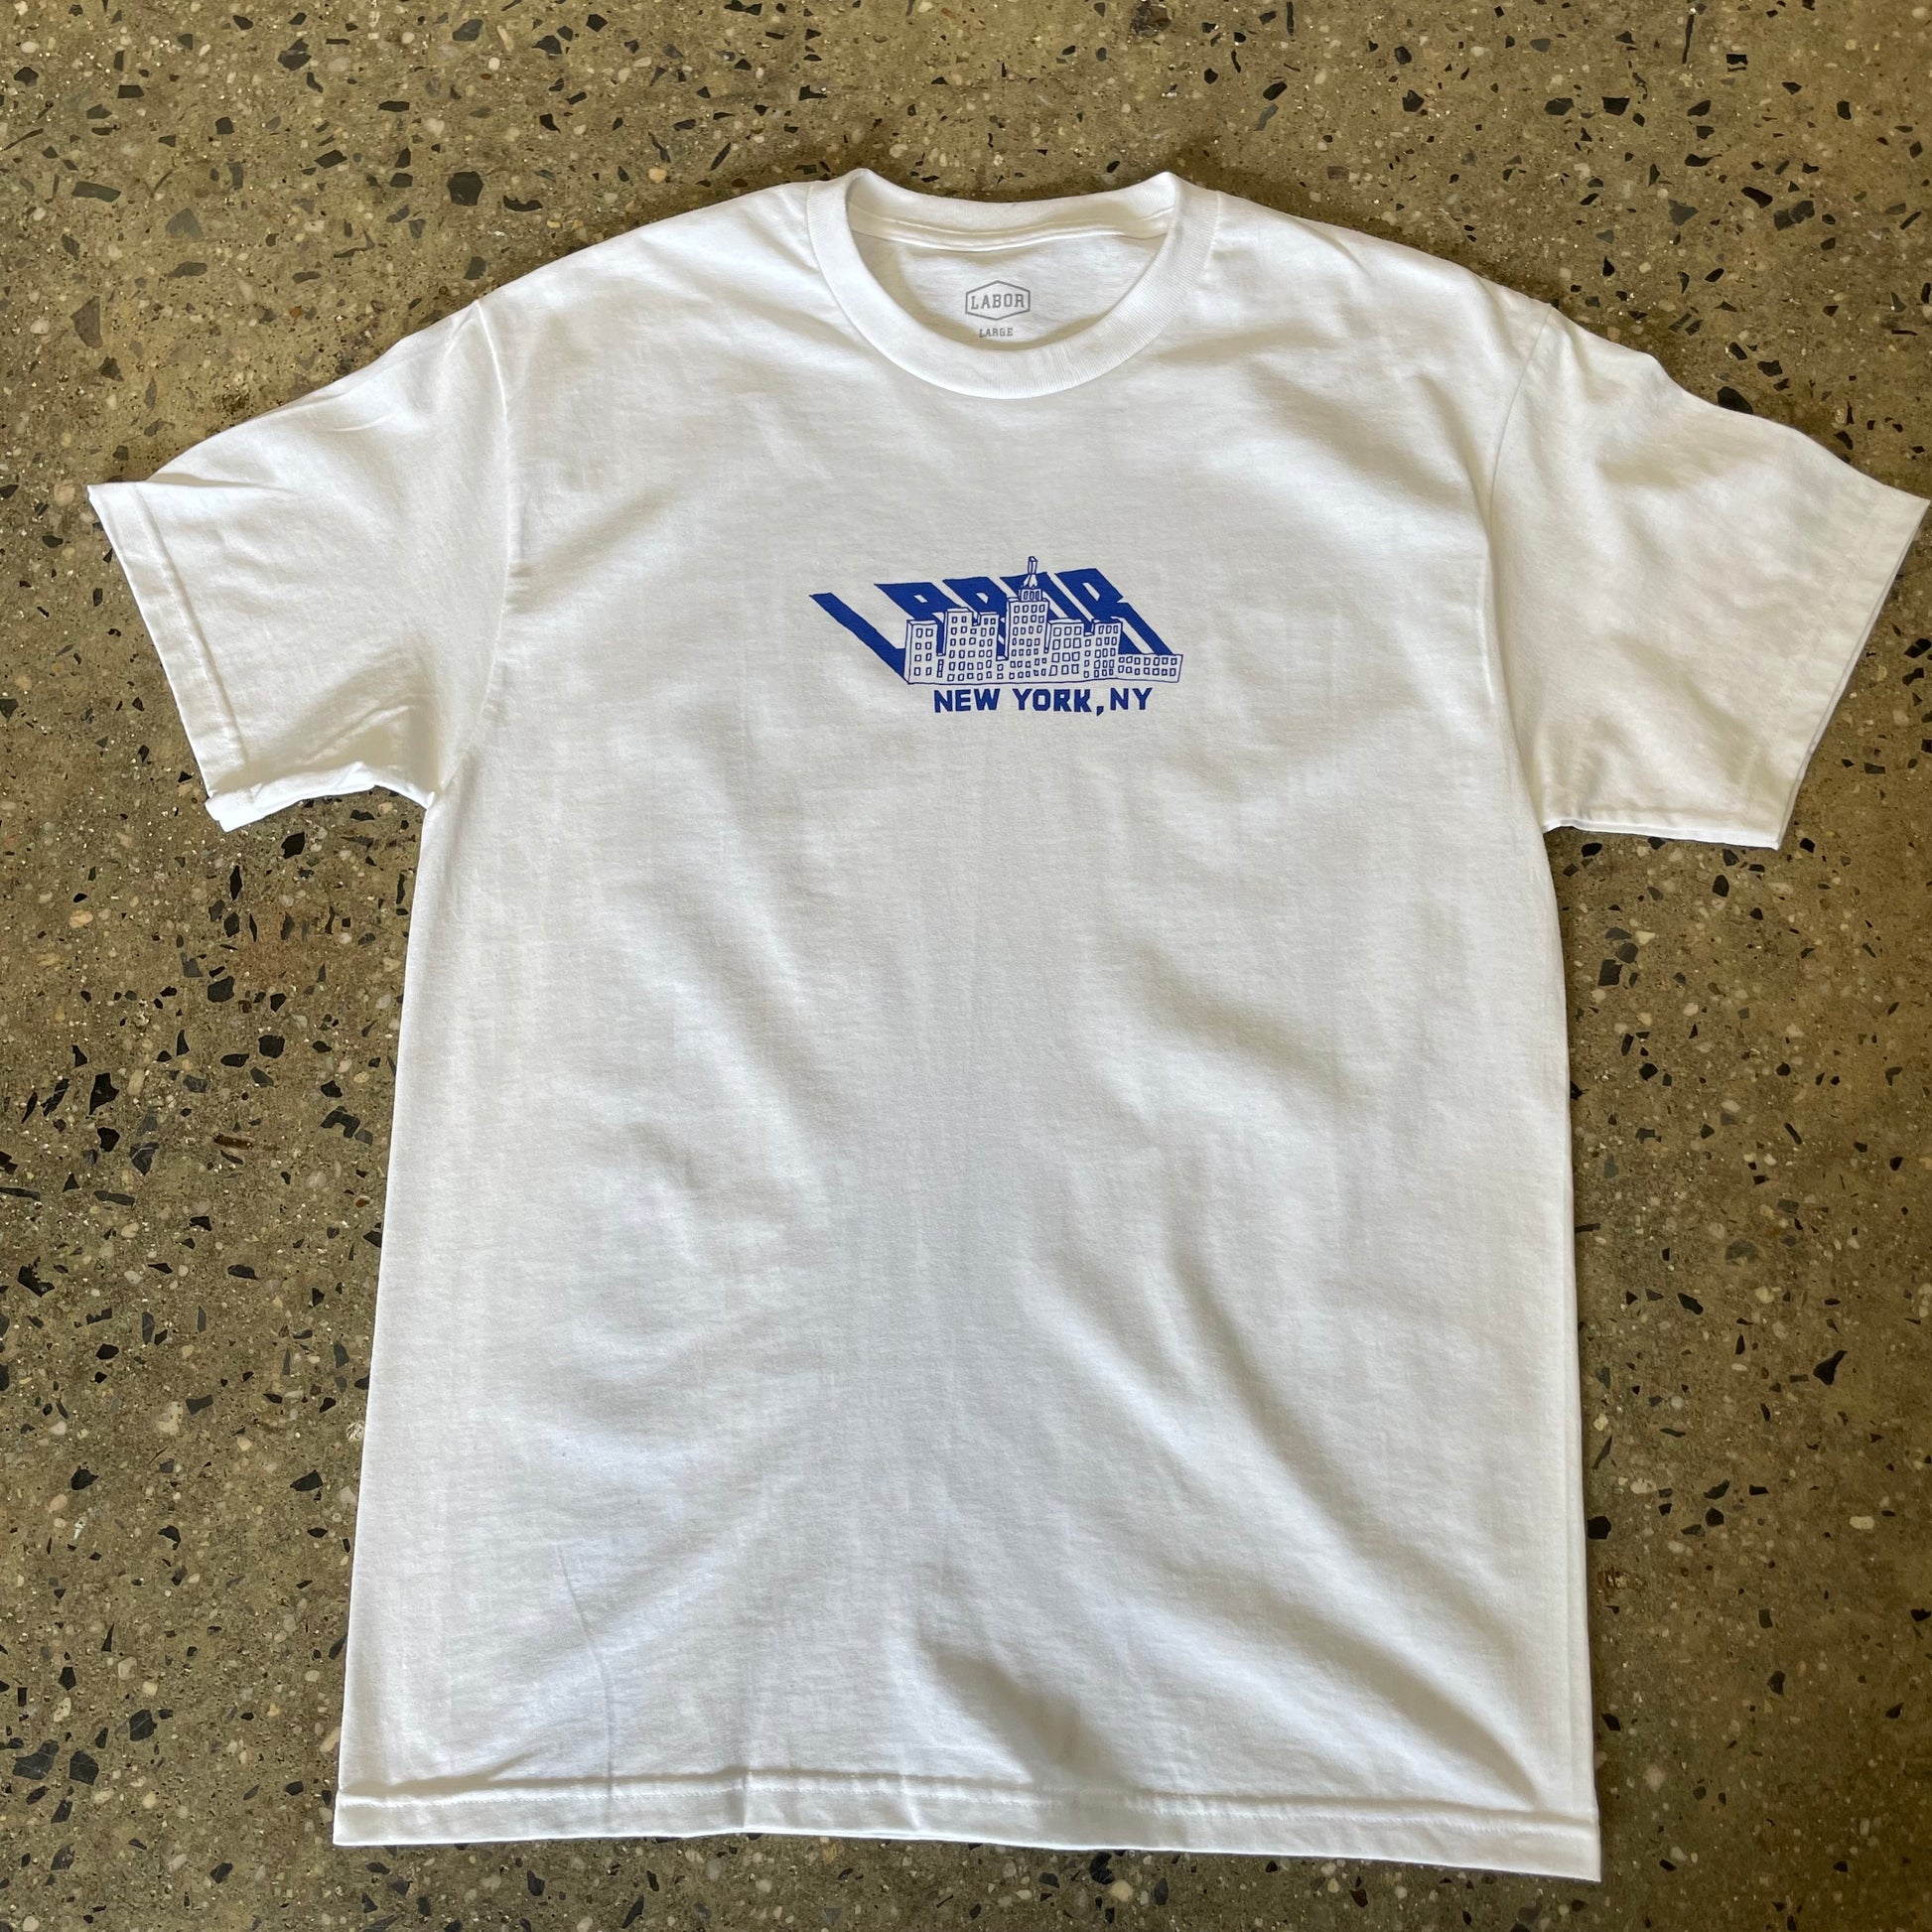 Blue labor skyline logo graphic in royal blue printed on white t-shirt